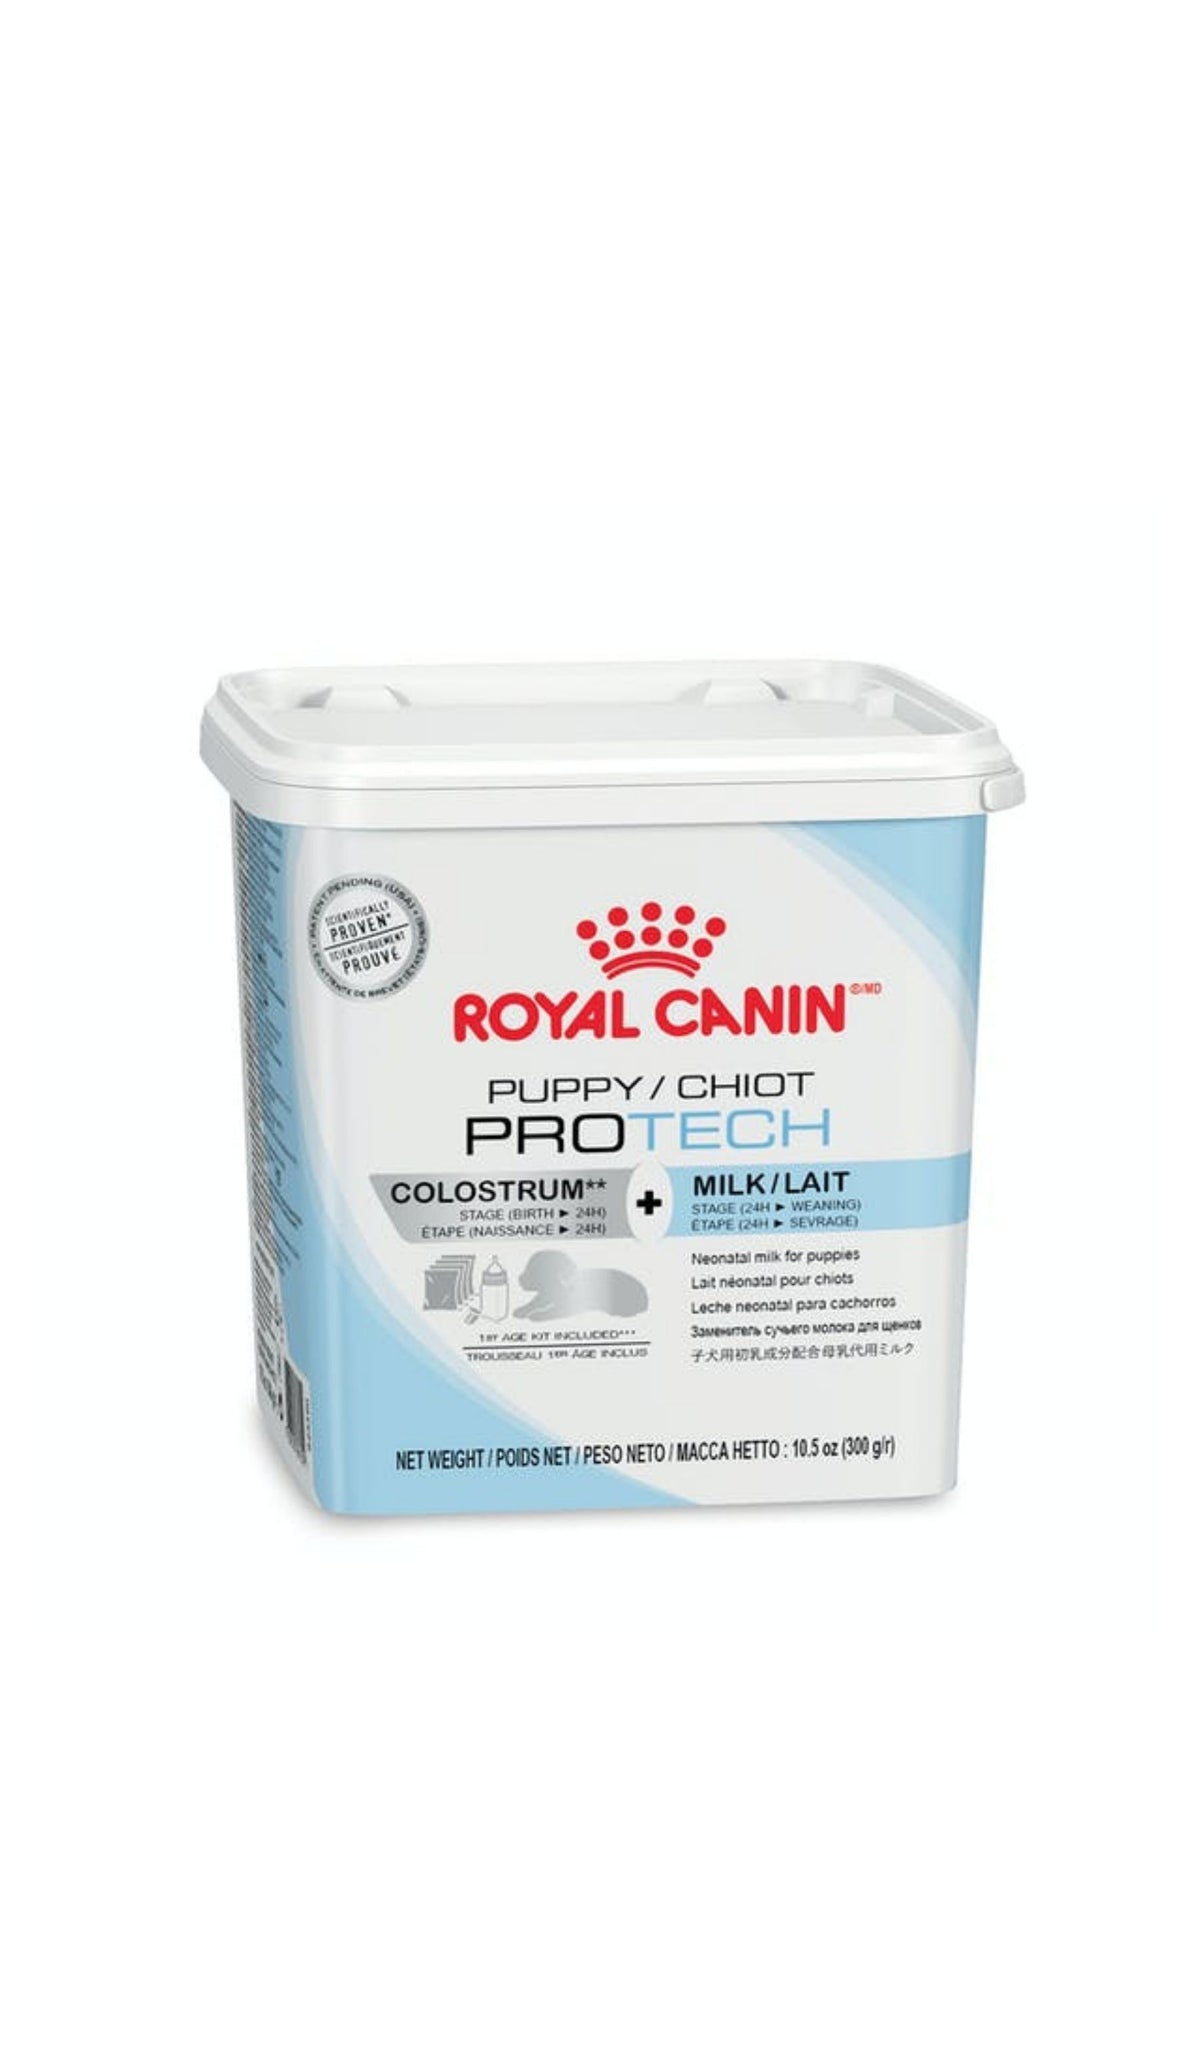 Royal Canin Professional Puppy ProTech Milk 300g